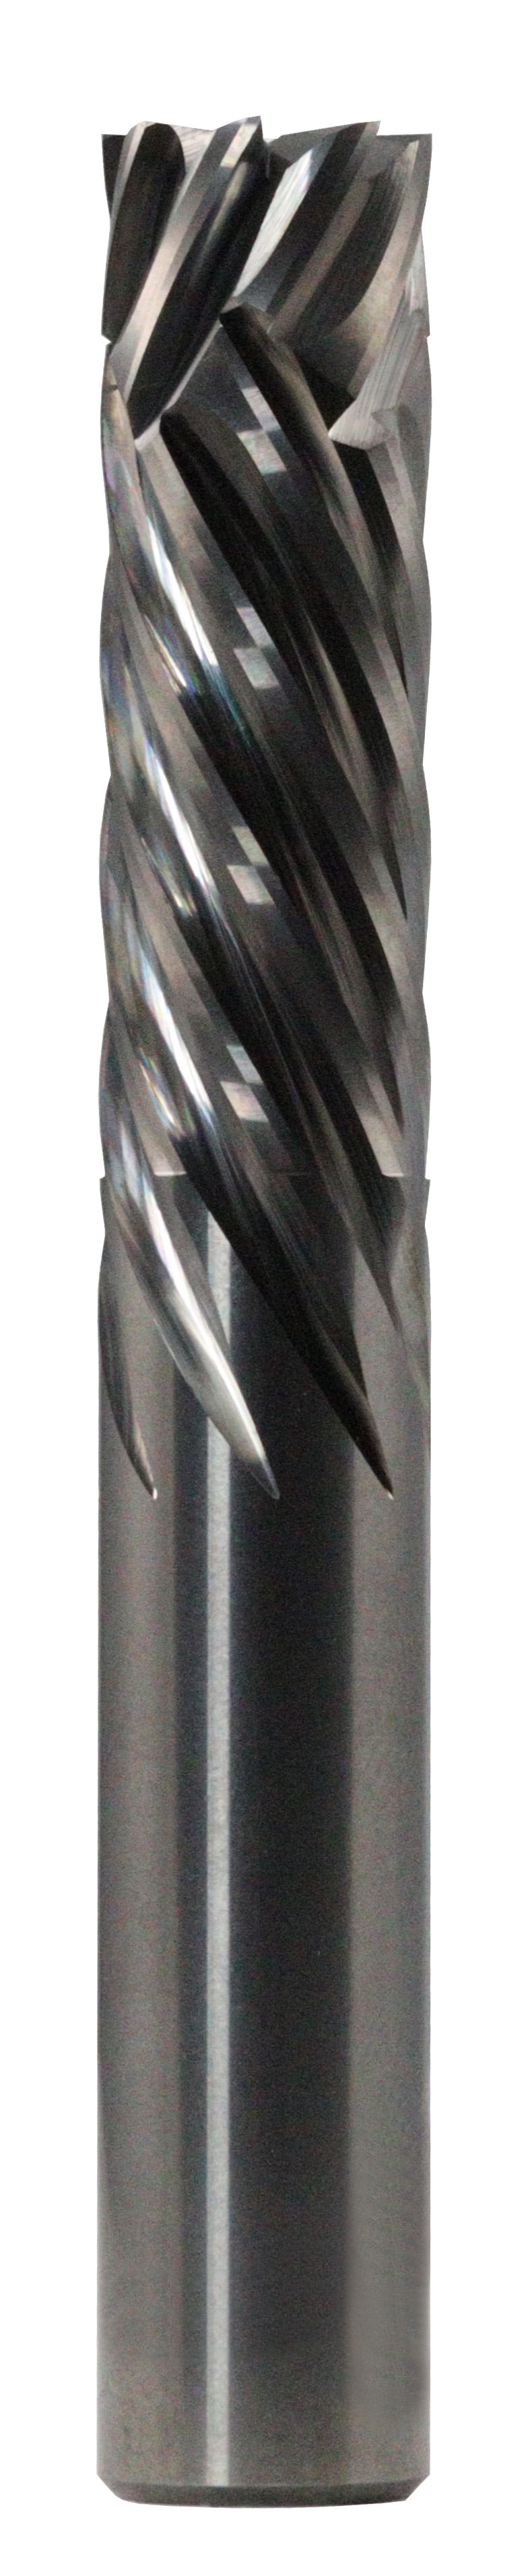 12.00mm Dia, 5 Flute, Square End End Mill - 42615